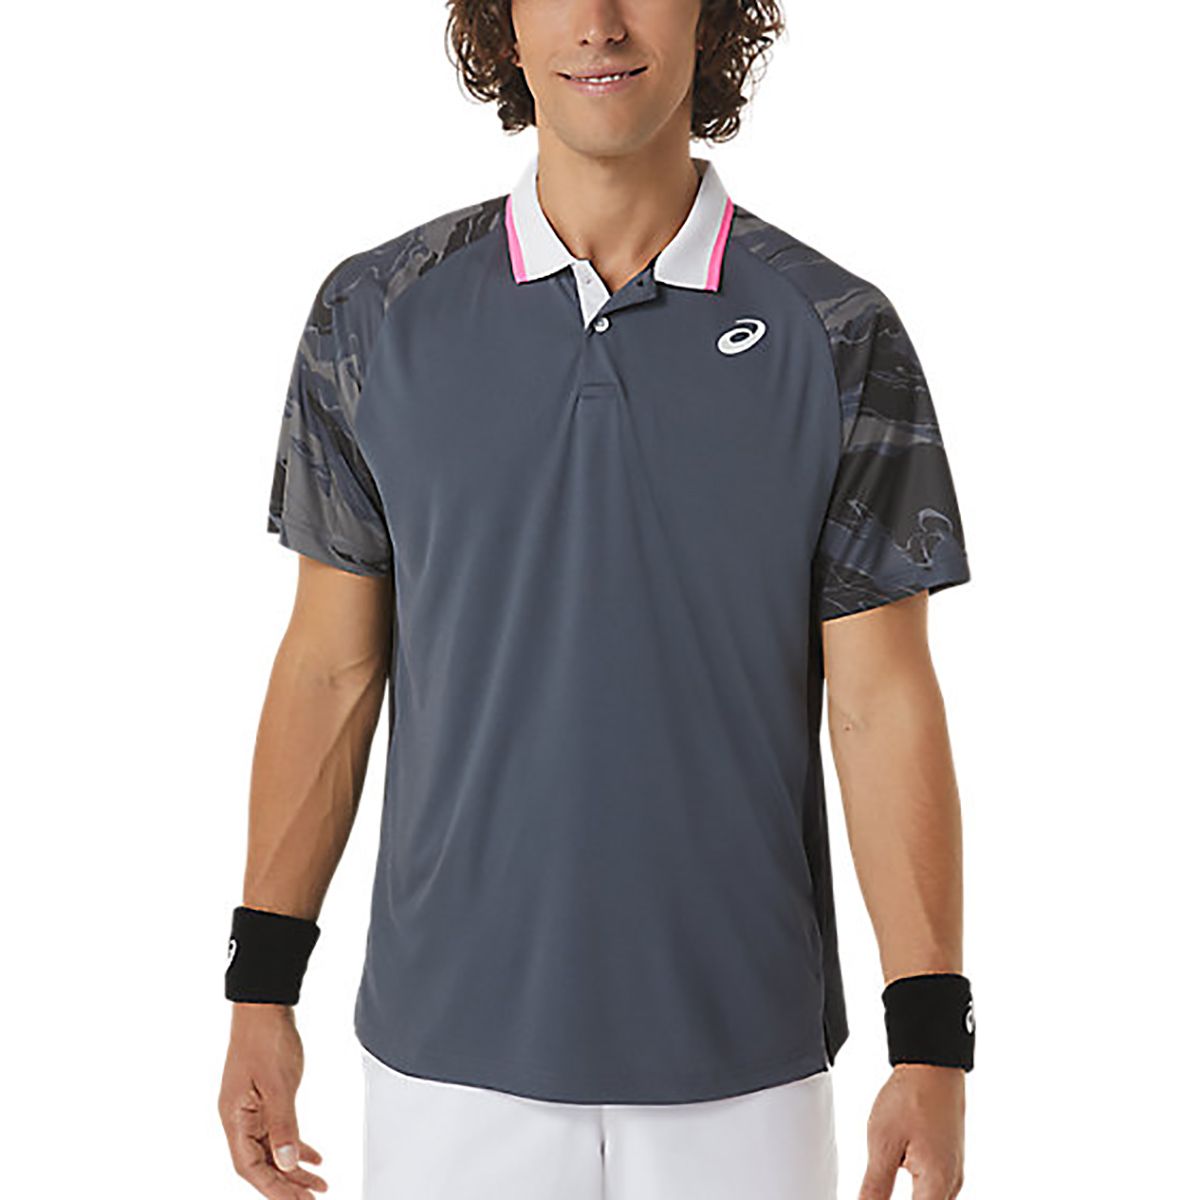 syndroom Een goede vriend Mew Mew Asics Court Graphic Men's Tennis Polo 2041A252-020